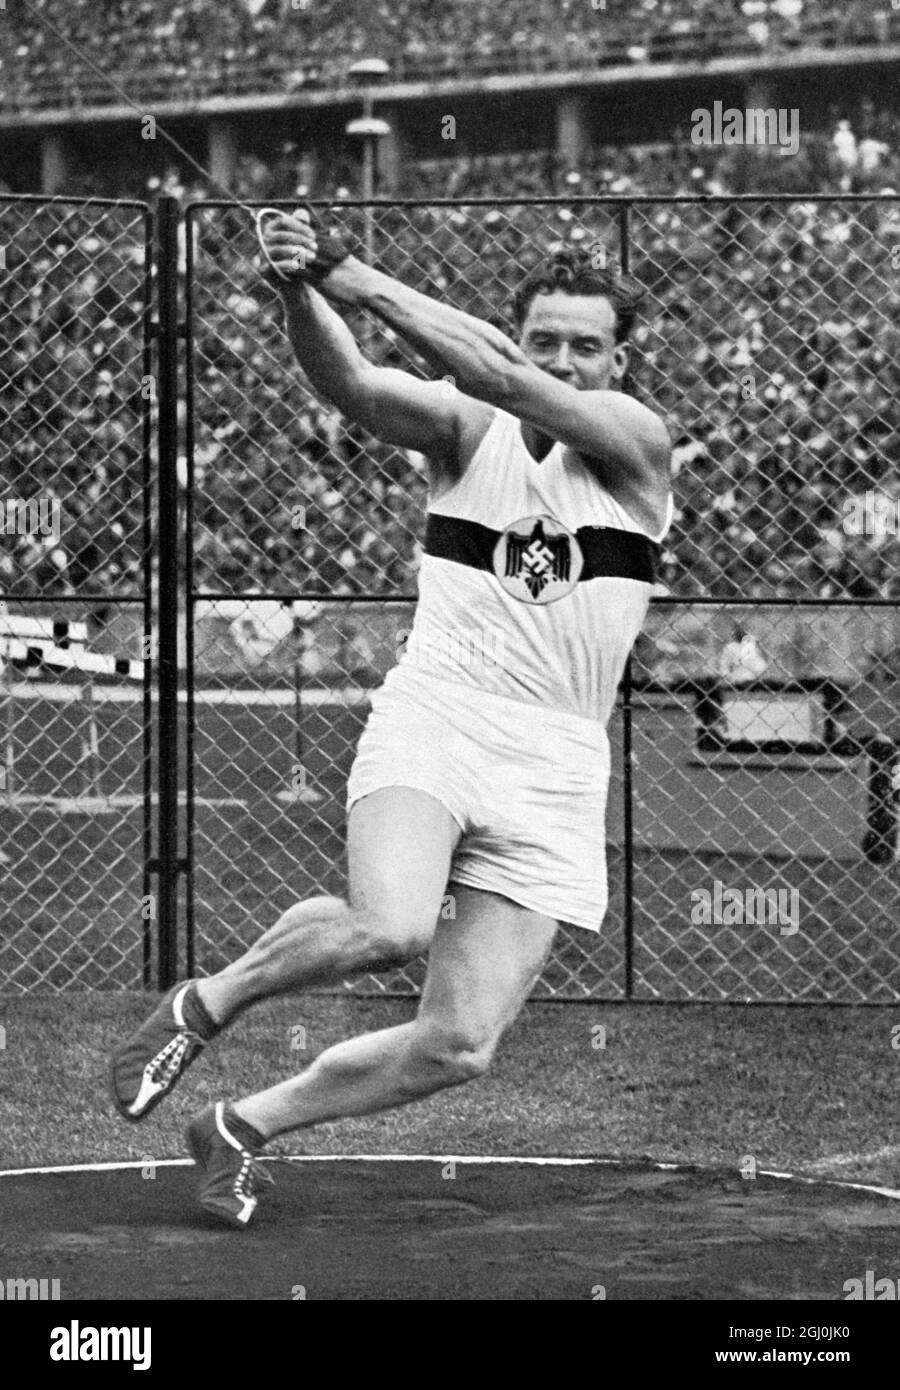 1936 Olympics, Berlin - Karl Hein (Germany), world record holder in the hammer  throw, makes a throw of 56,49 metres. ©TopFoto Stock Photo - Alamy